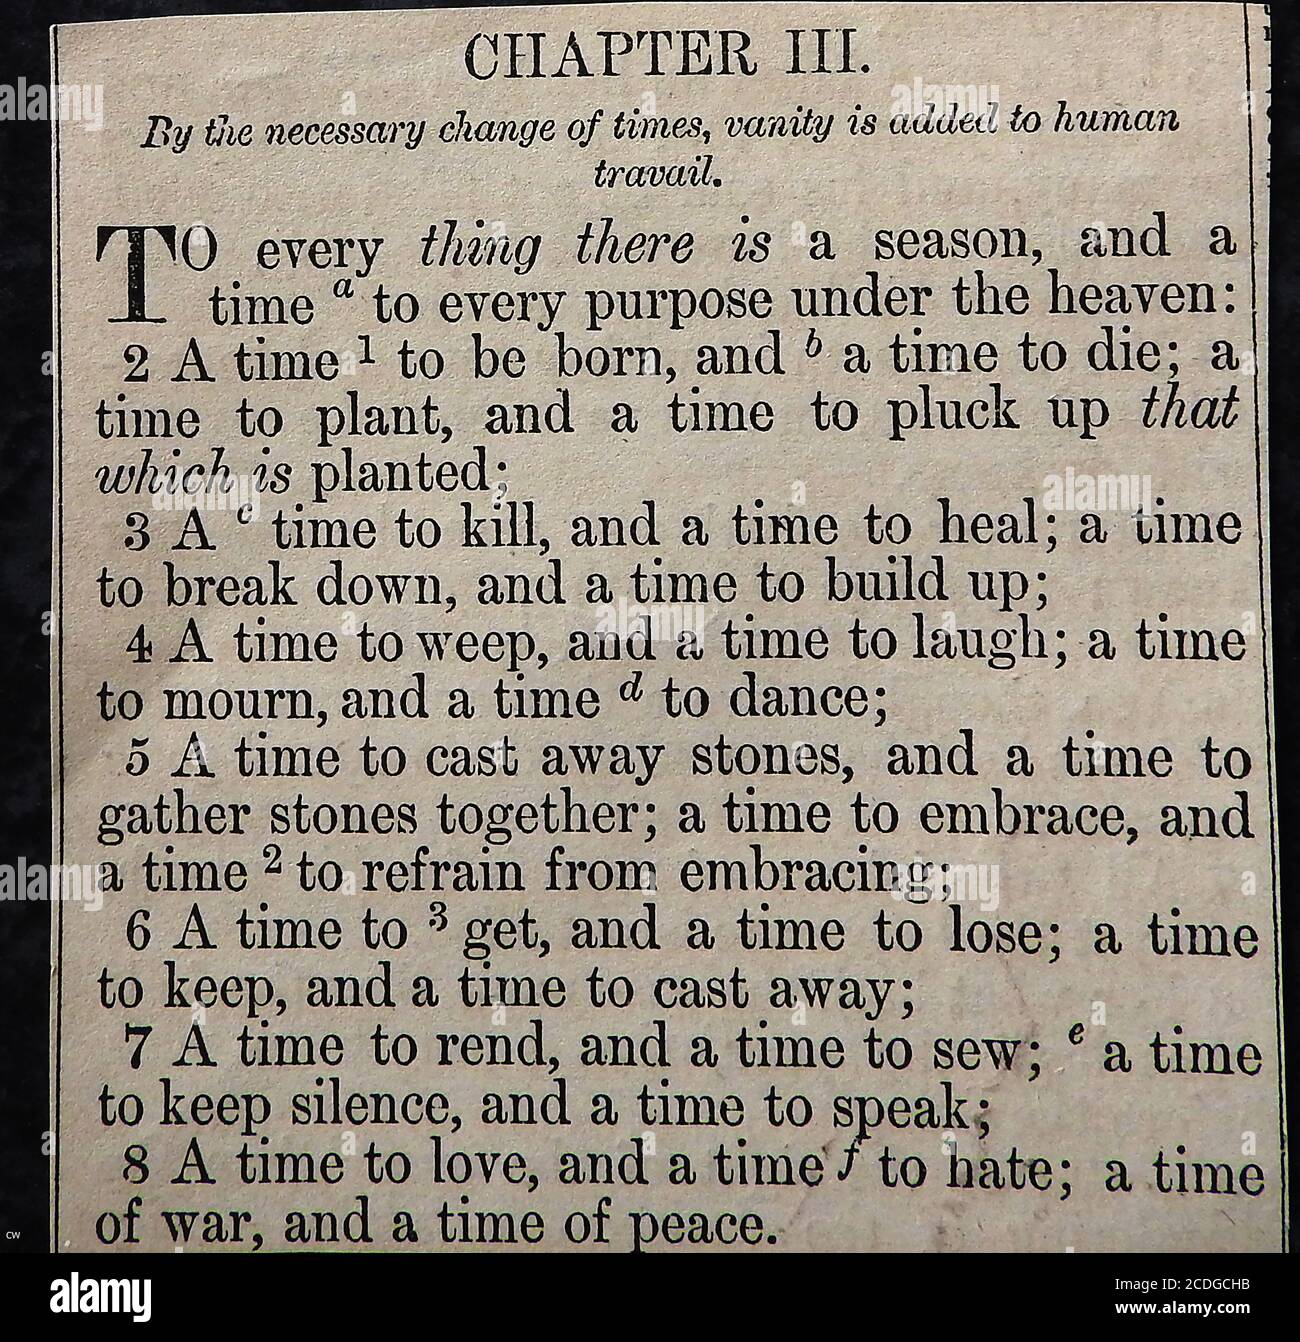 Victorian Bible extract of Ecclesiastes III - 'A time for every purpose under heaven '.  The passage is a philosophical view of life that has proved inspirational to a wide  audience regardless of religious  persuasion or no religion at all.  It has featured in pop songs  ( 'Turn, Turn, Turn' and 'To Everything There Is a Season' )   by groups such as the Byrds; the Limeliters;  Judy Collins; and other artists. It was originally written by Pete Seeger. Stock Photo